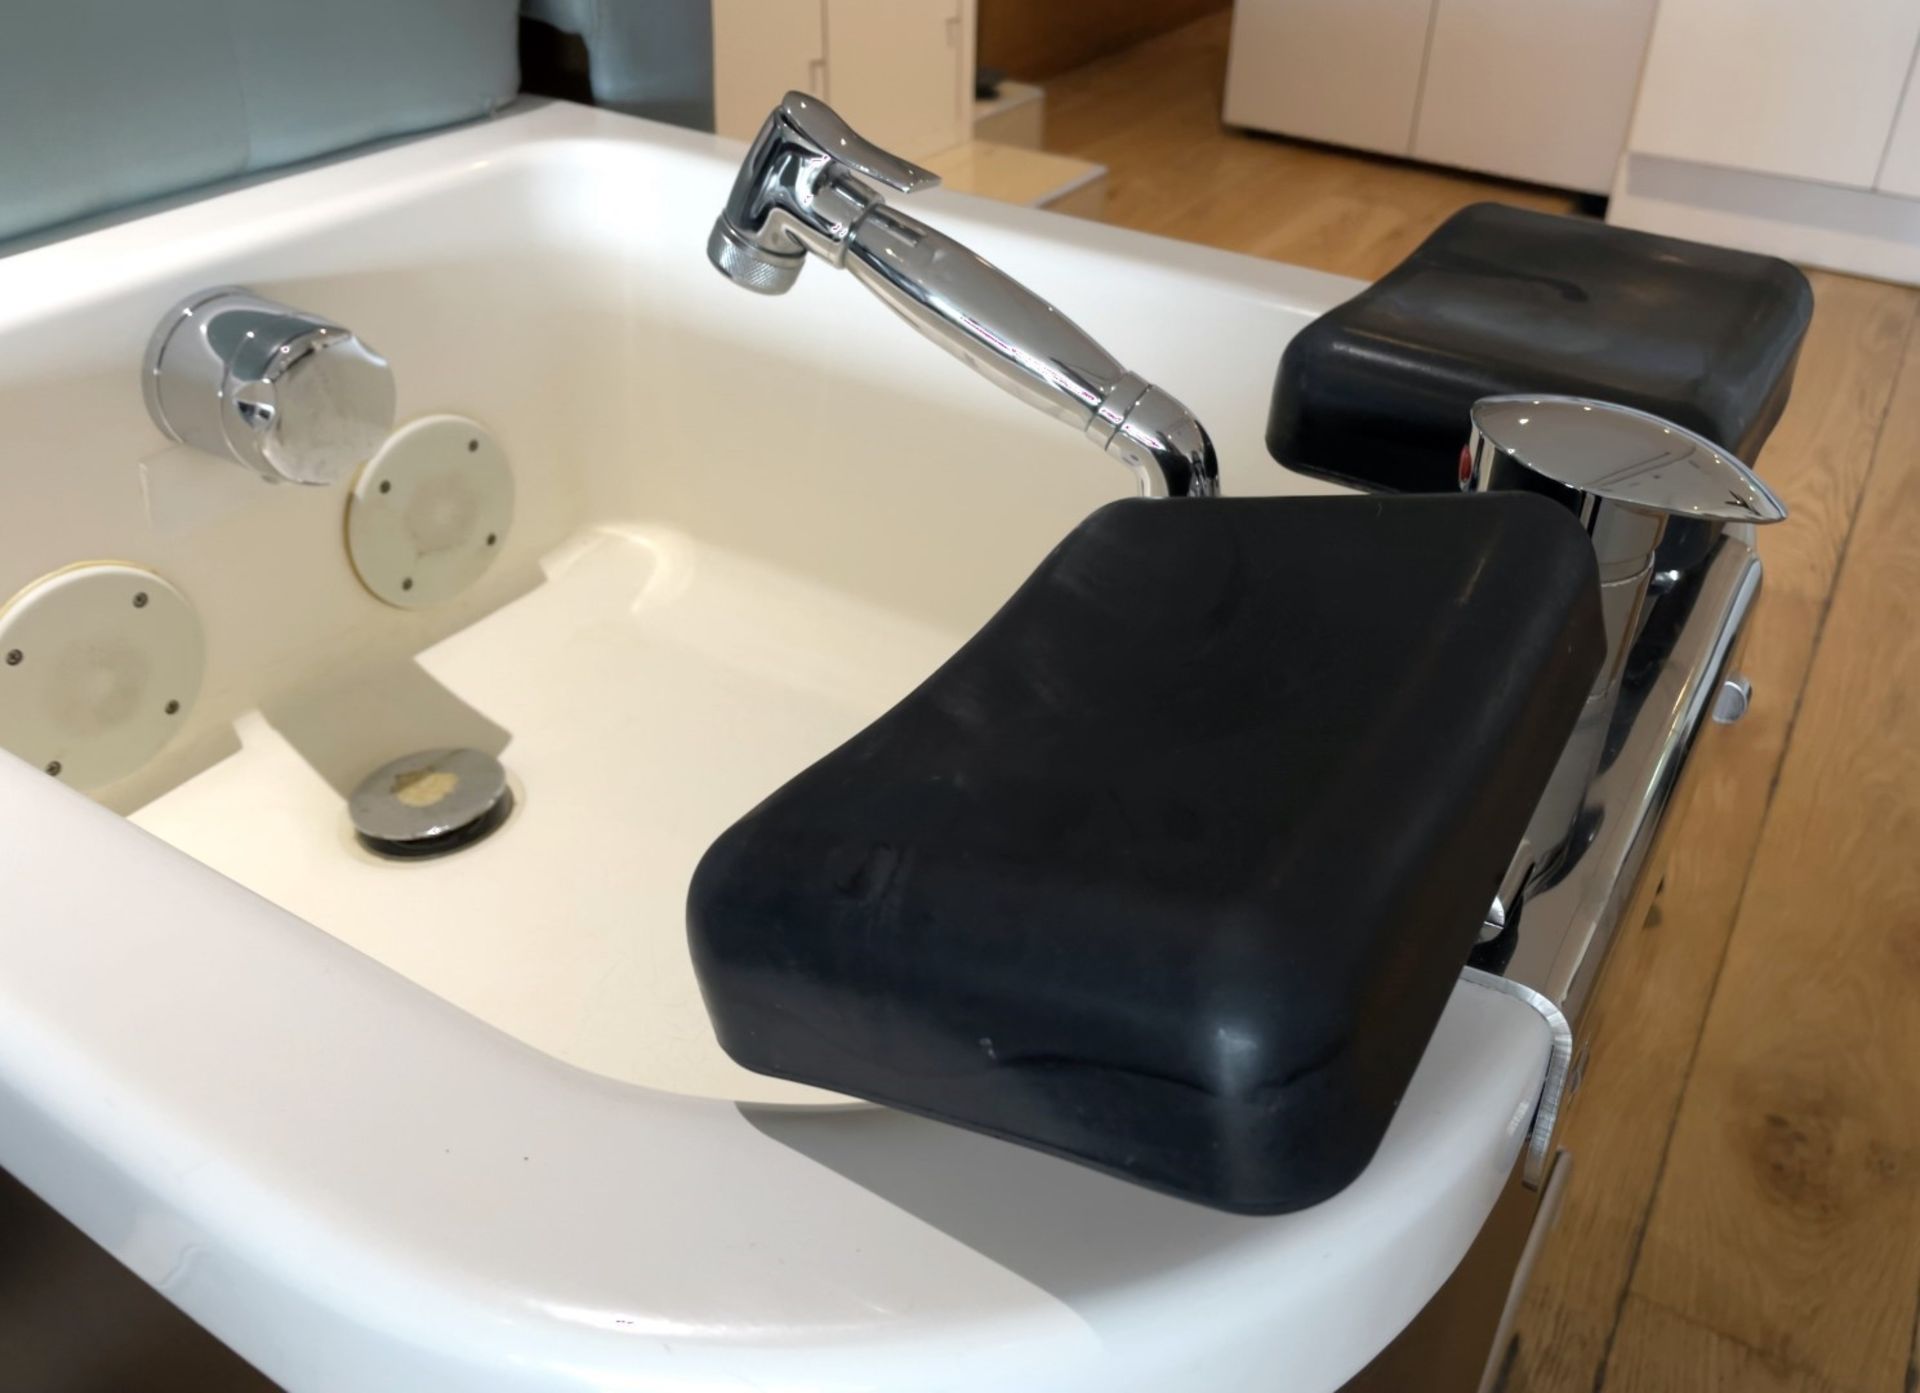 1 x NILO Professional Salon Pedicure Spa Chair With Massage Function - Includes Remote Control - Image 2 of 10